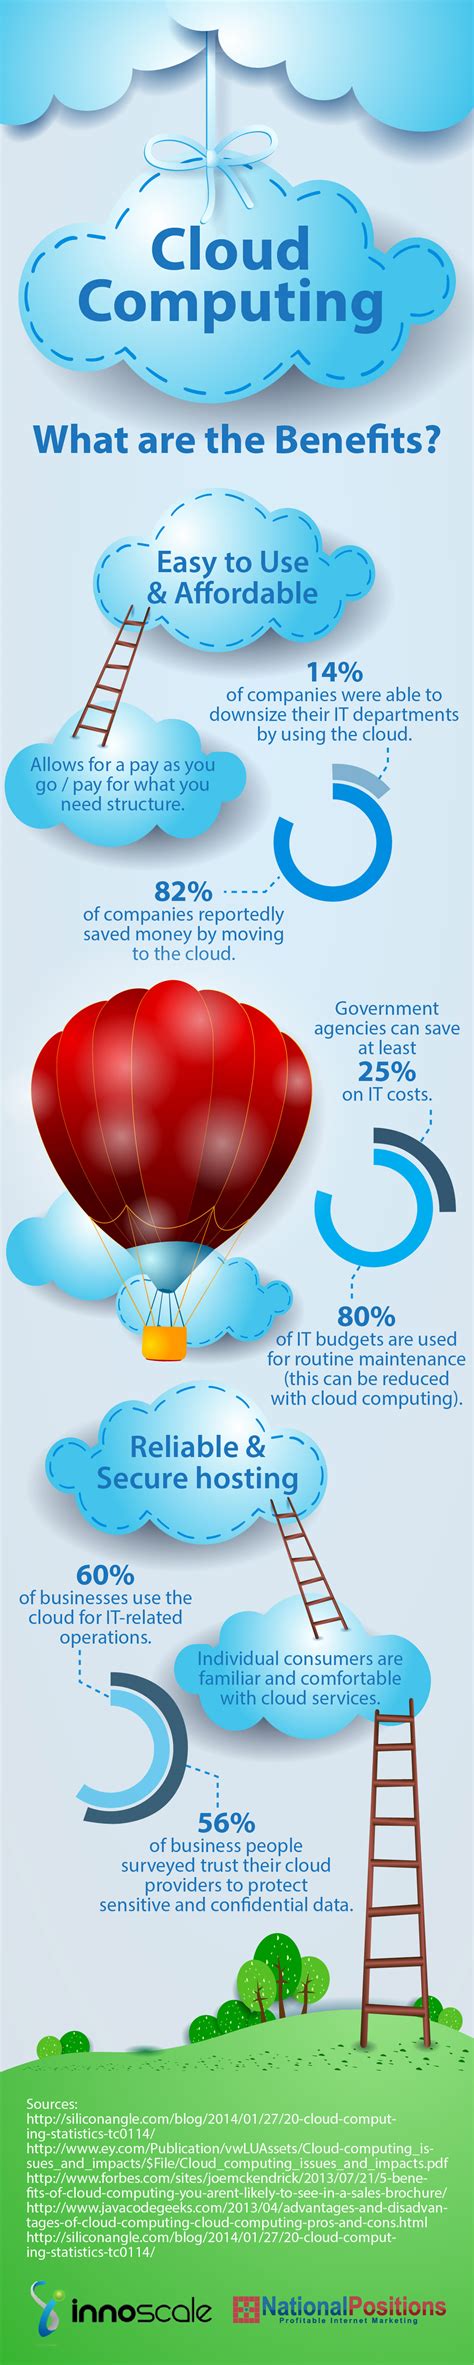 Benefits Of Cloud Computing In Business Top 10 Mind Boggling Benefits